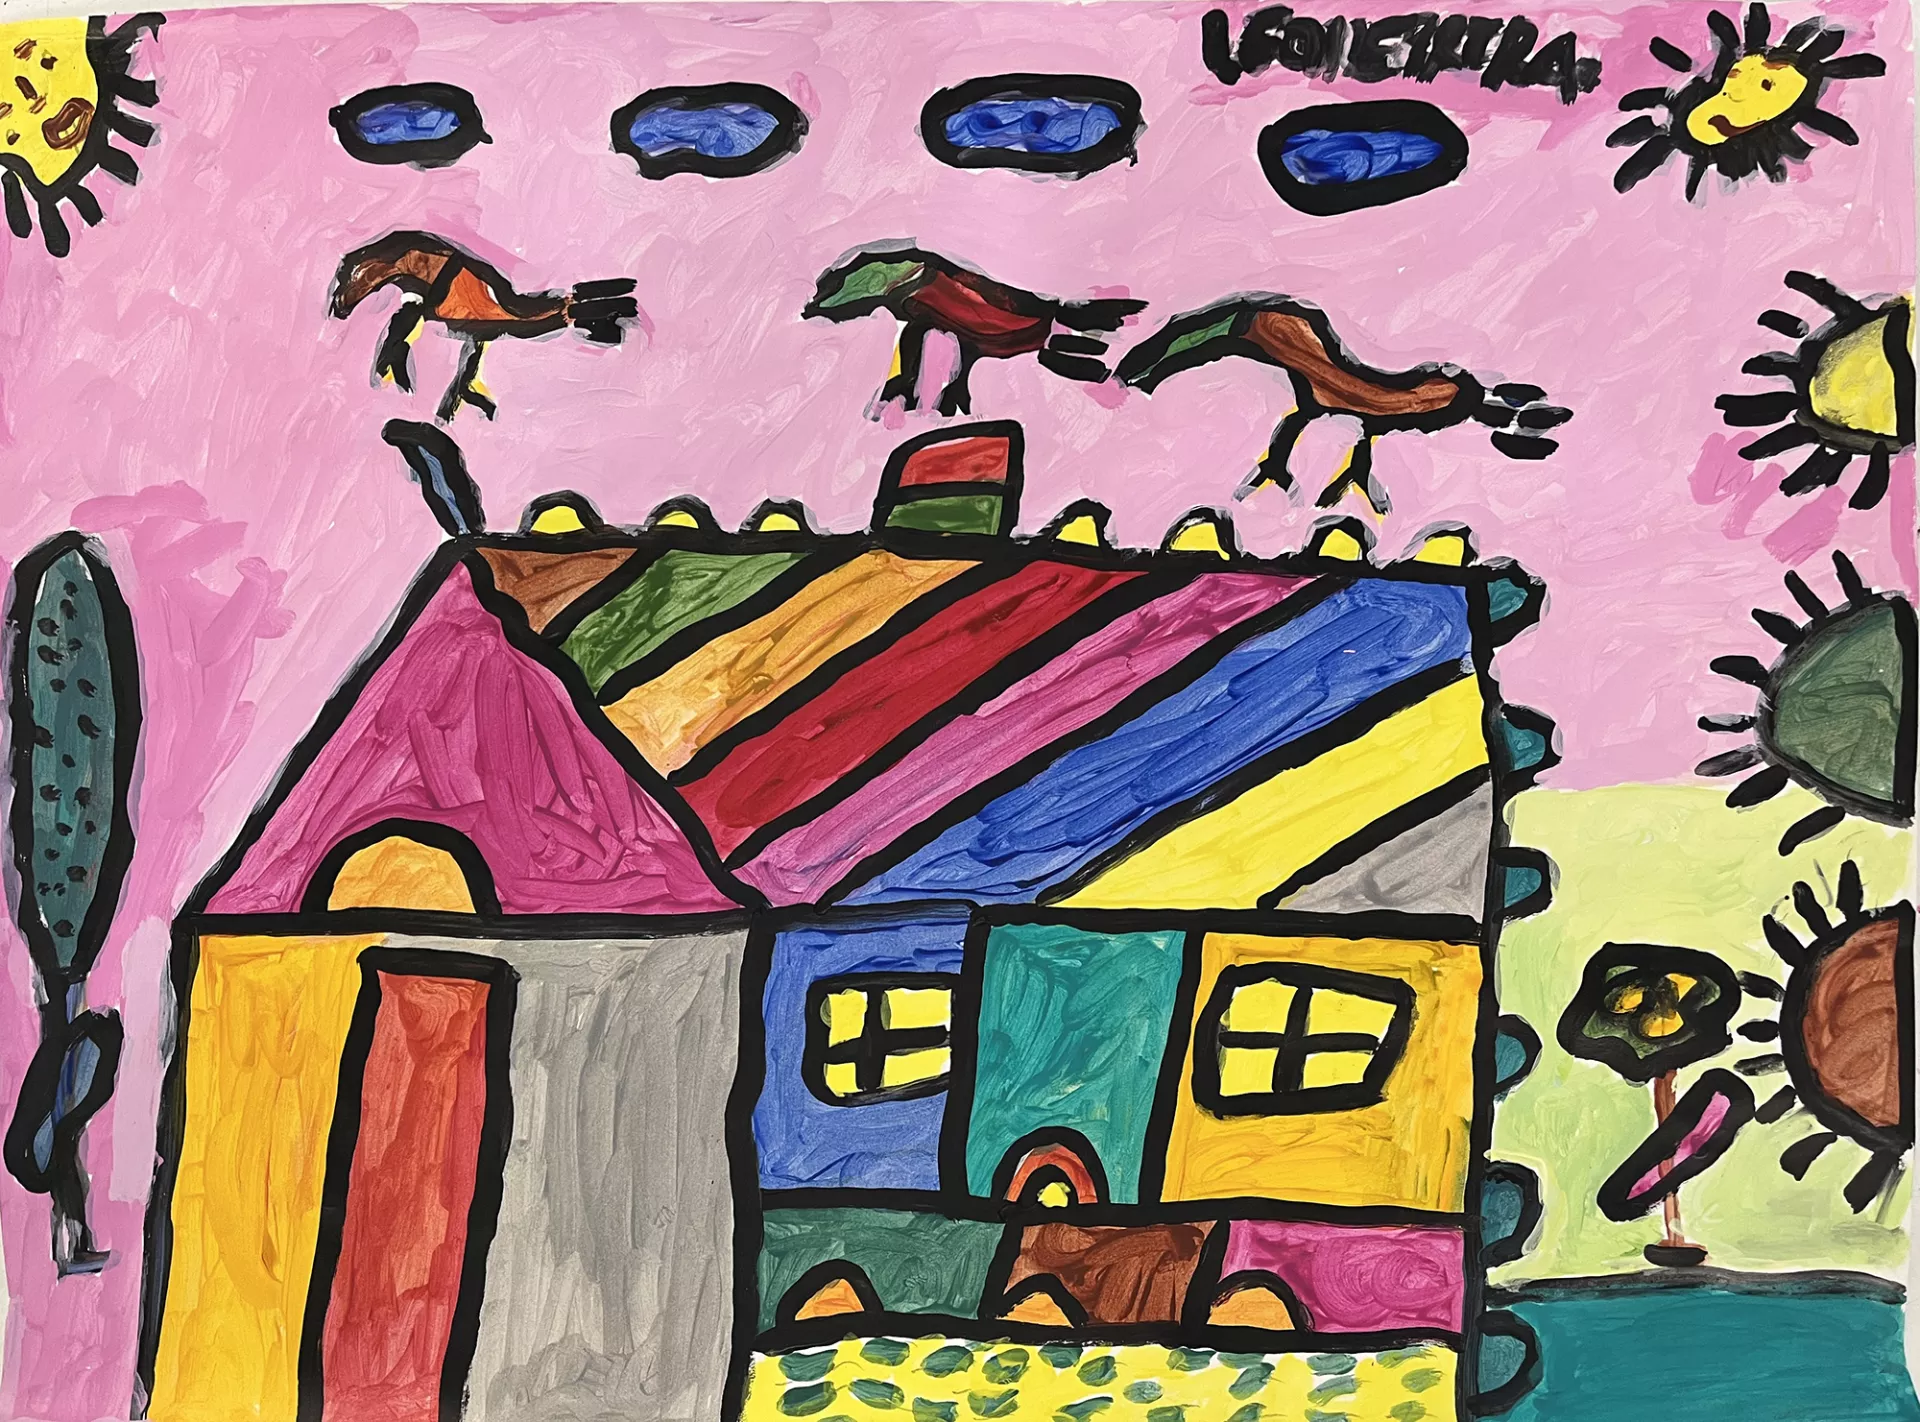 Leo Herrera Untitled, 2022 A colorful house is presented in this painting. The roof is a rainbow of diagonal bands, the walls a patchwork of hues. Around the house in a pink sky there are four blue clouds, three curling birds, two radiating suns with faces, and a big flower.  Acrylic on paper. 18” x 24”